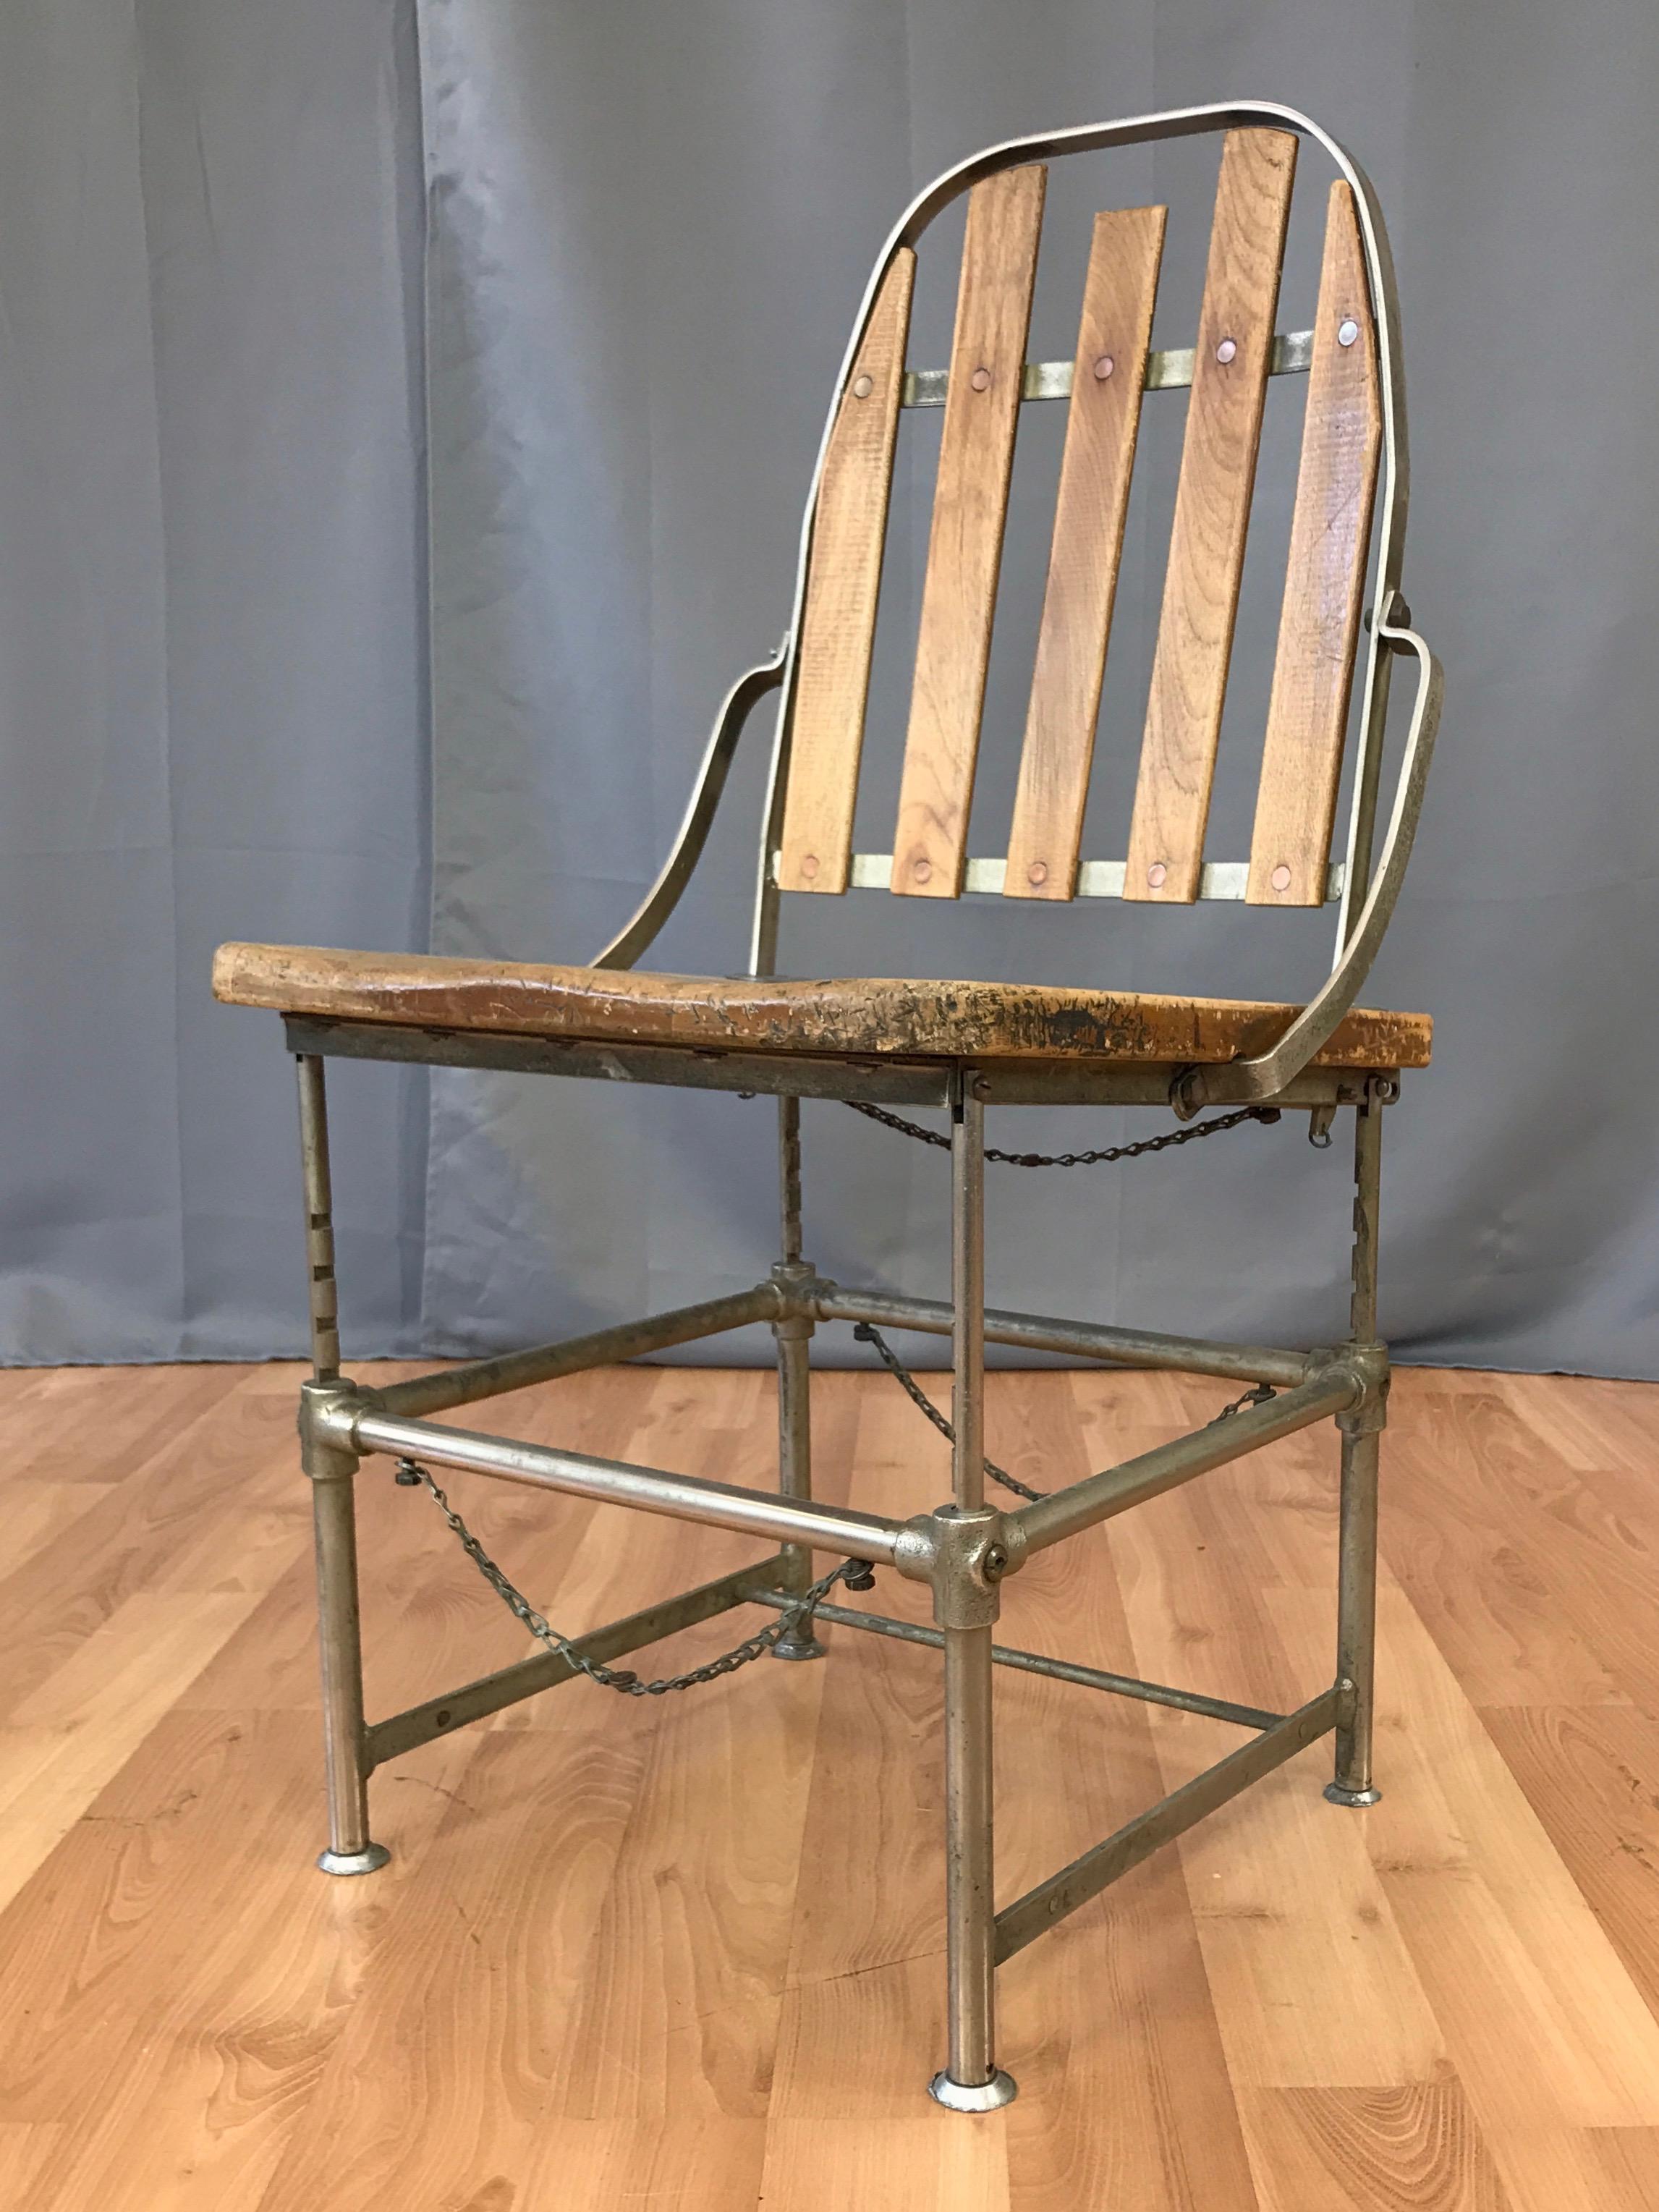 An important and rare iron and wood “Adjustable Industrial Chair” by Brizard & Young of San Francisco, California, dating from the turn of the 20th century. Produced for a brief time in limited numbers, this innovative early Machine Age design is